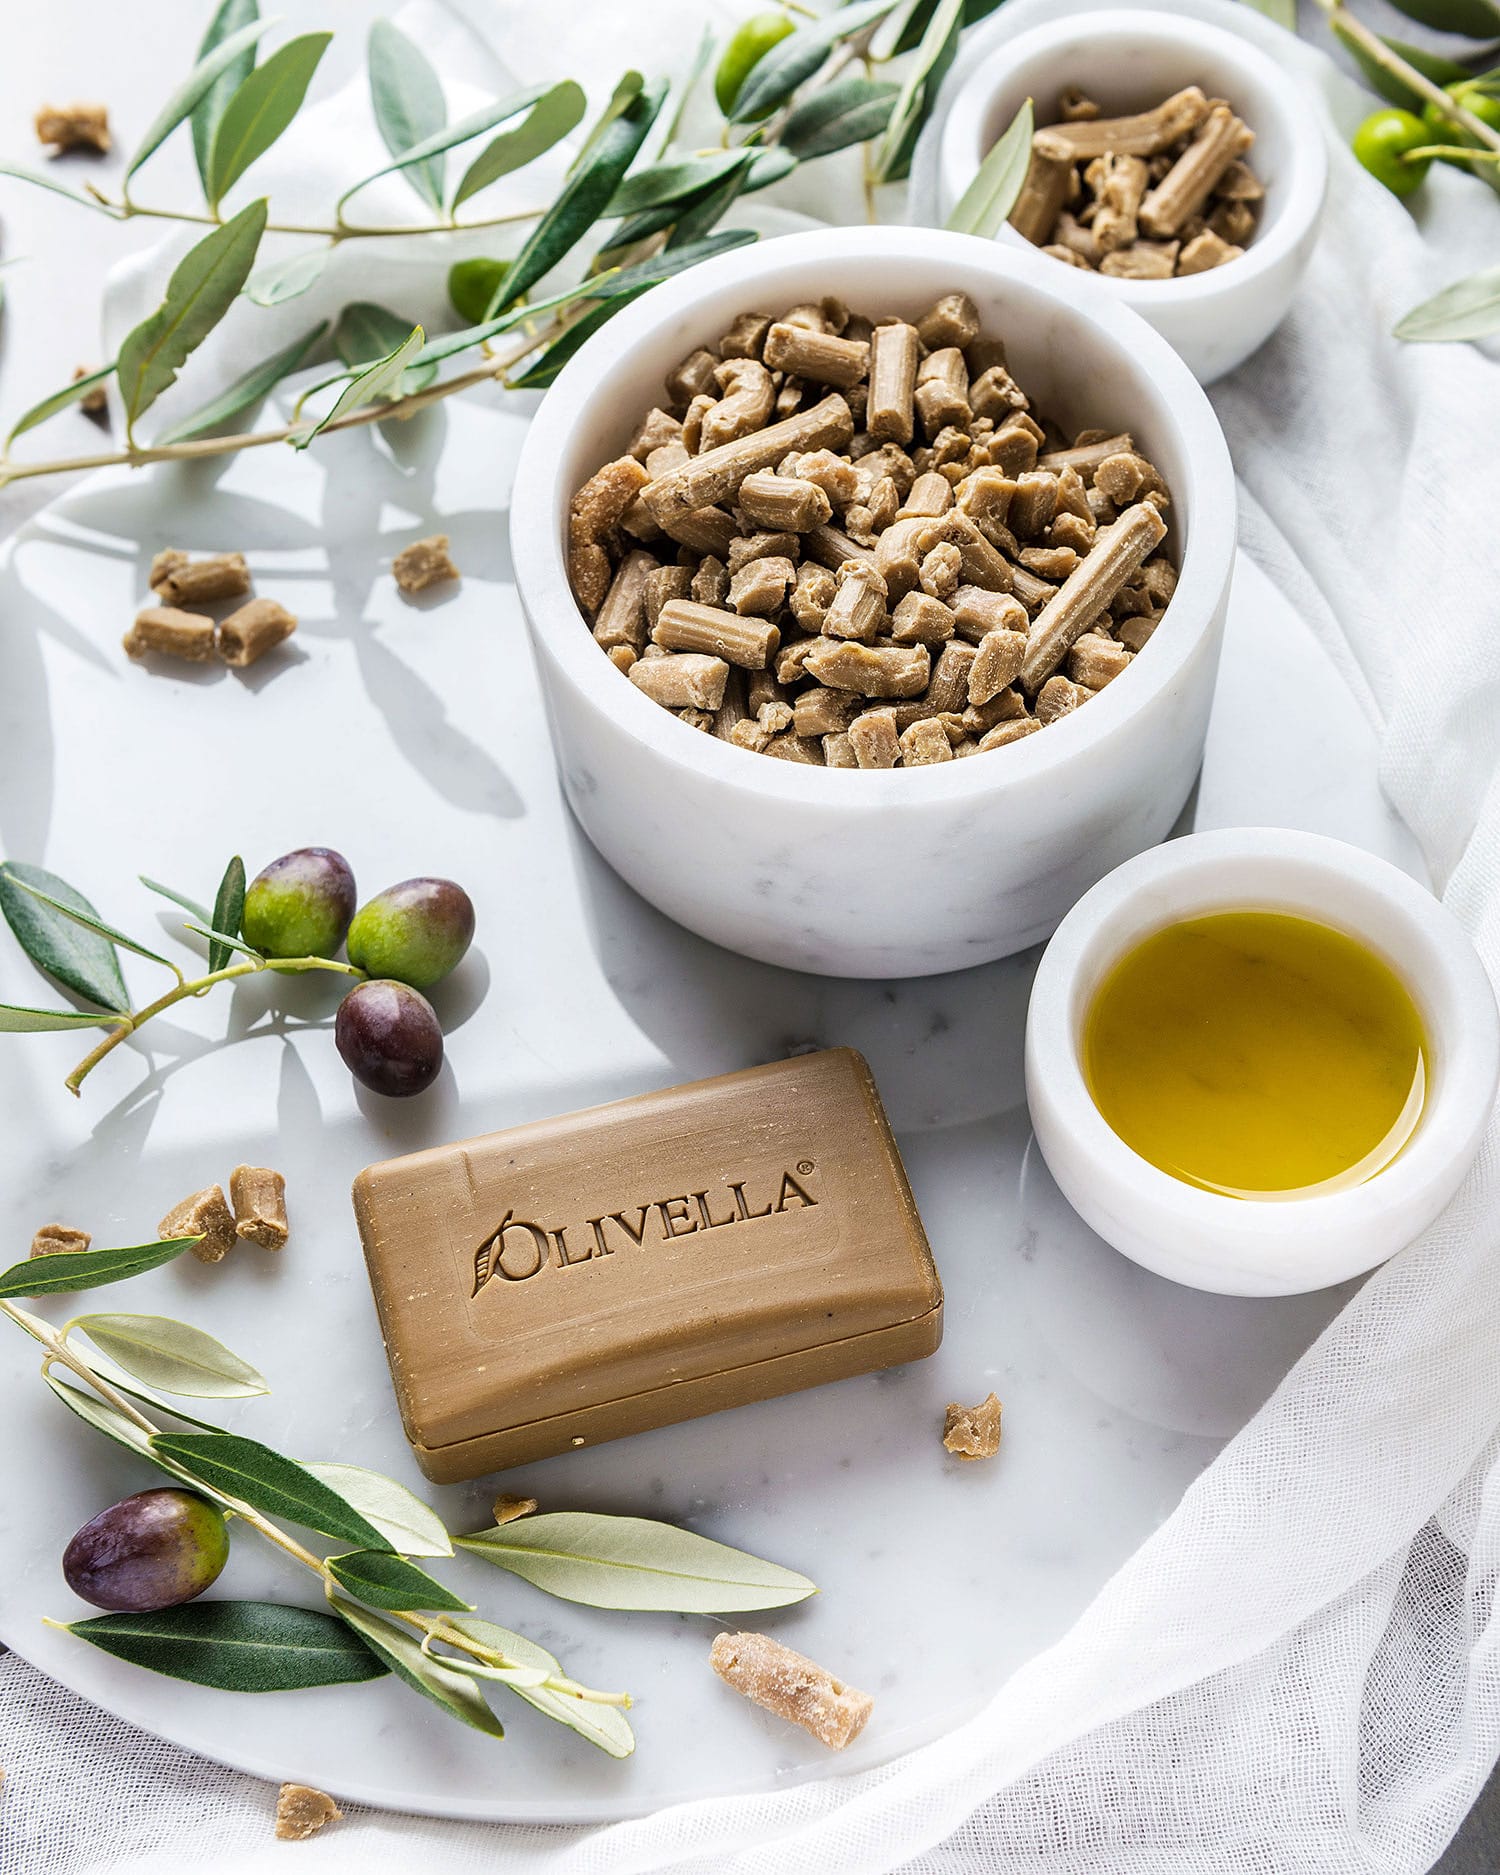 Olive oil soaps from Olivella